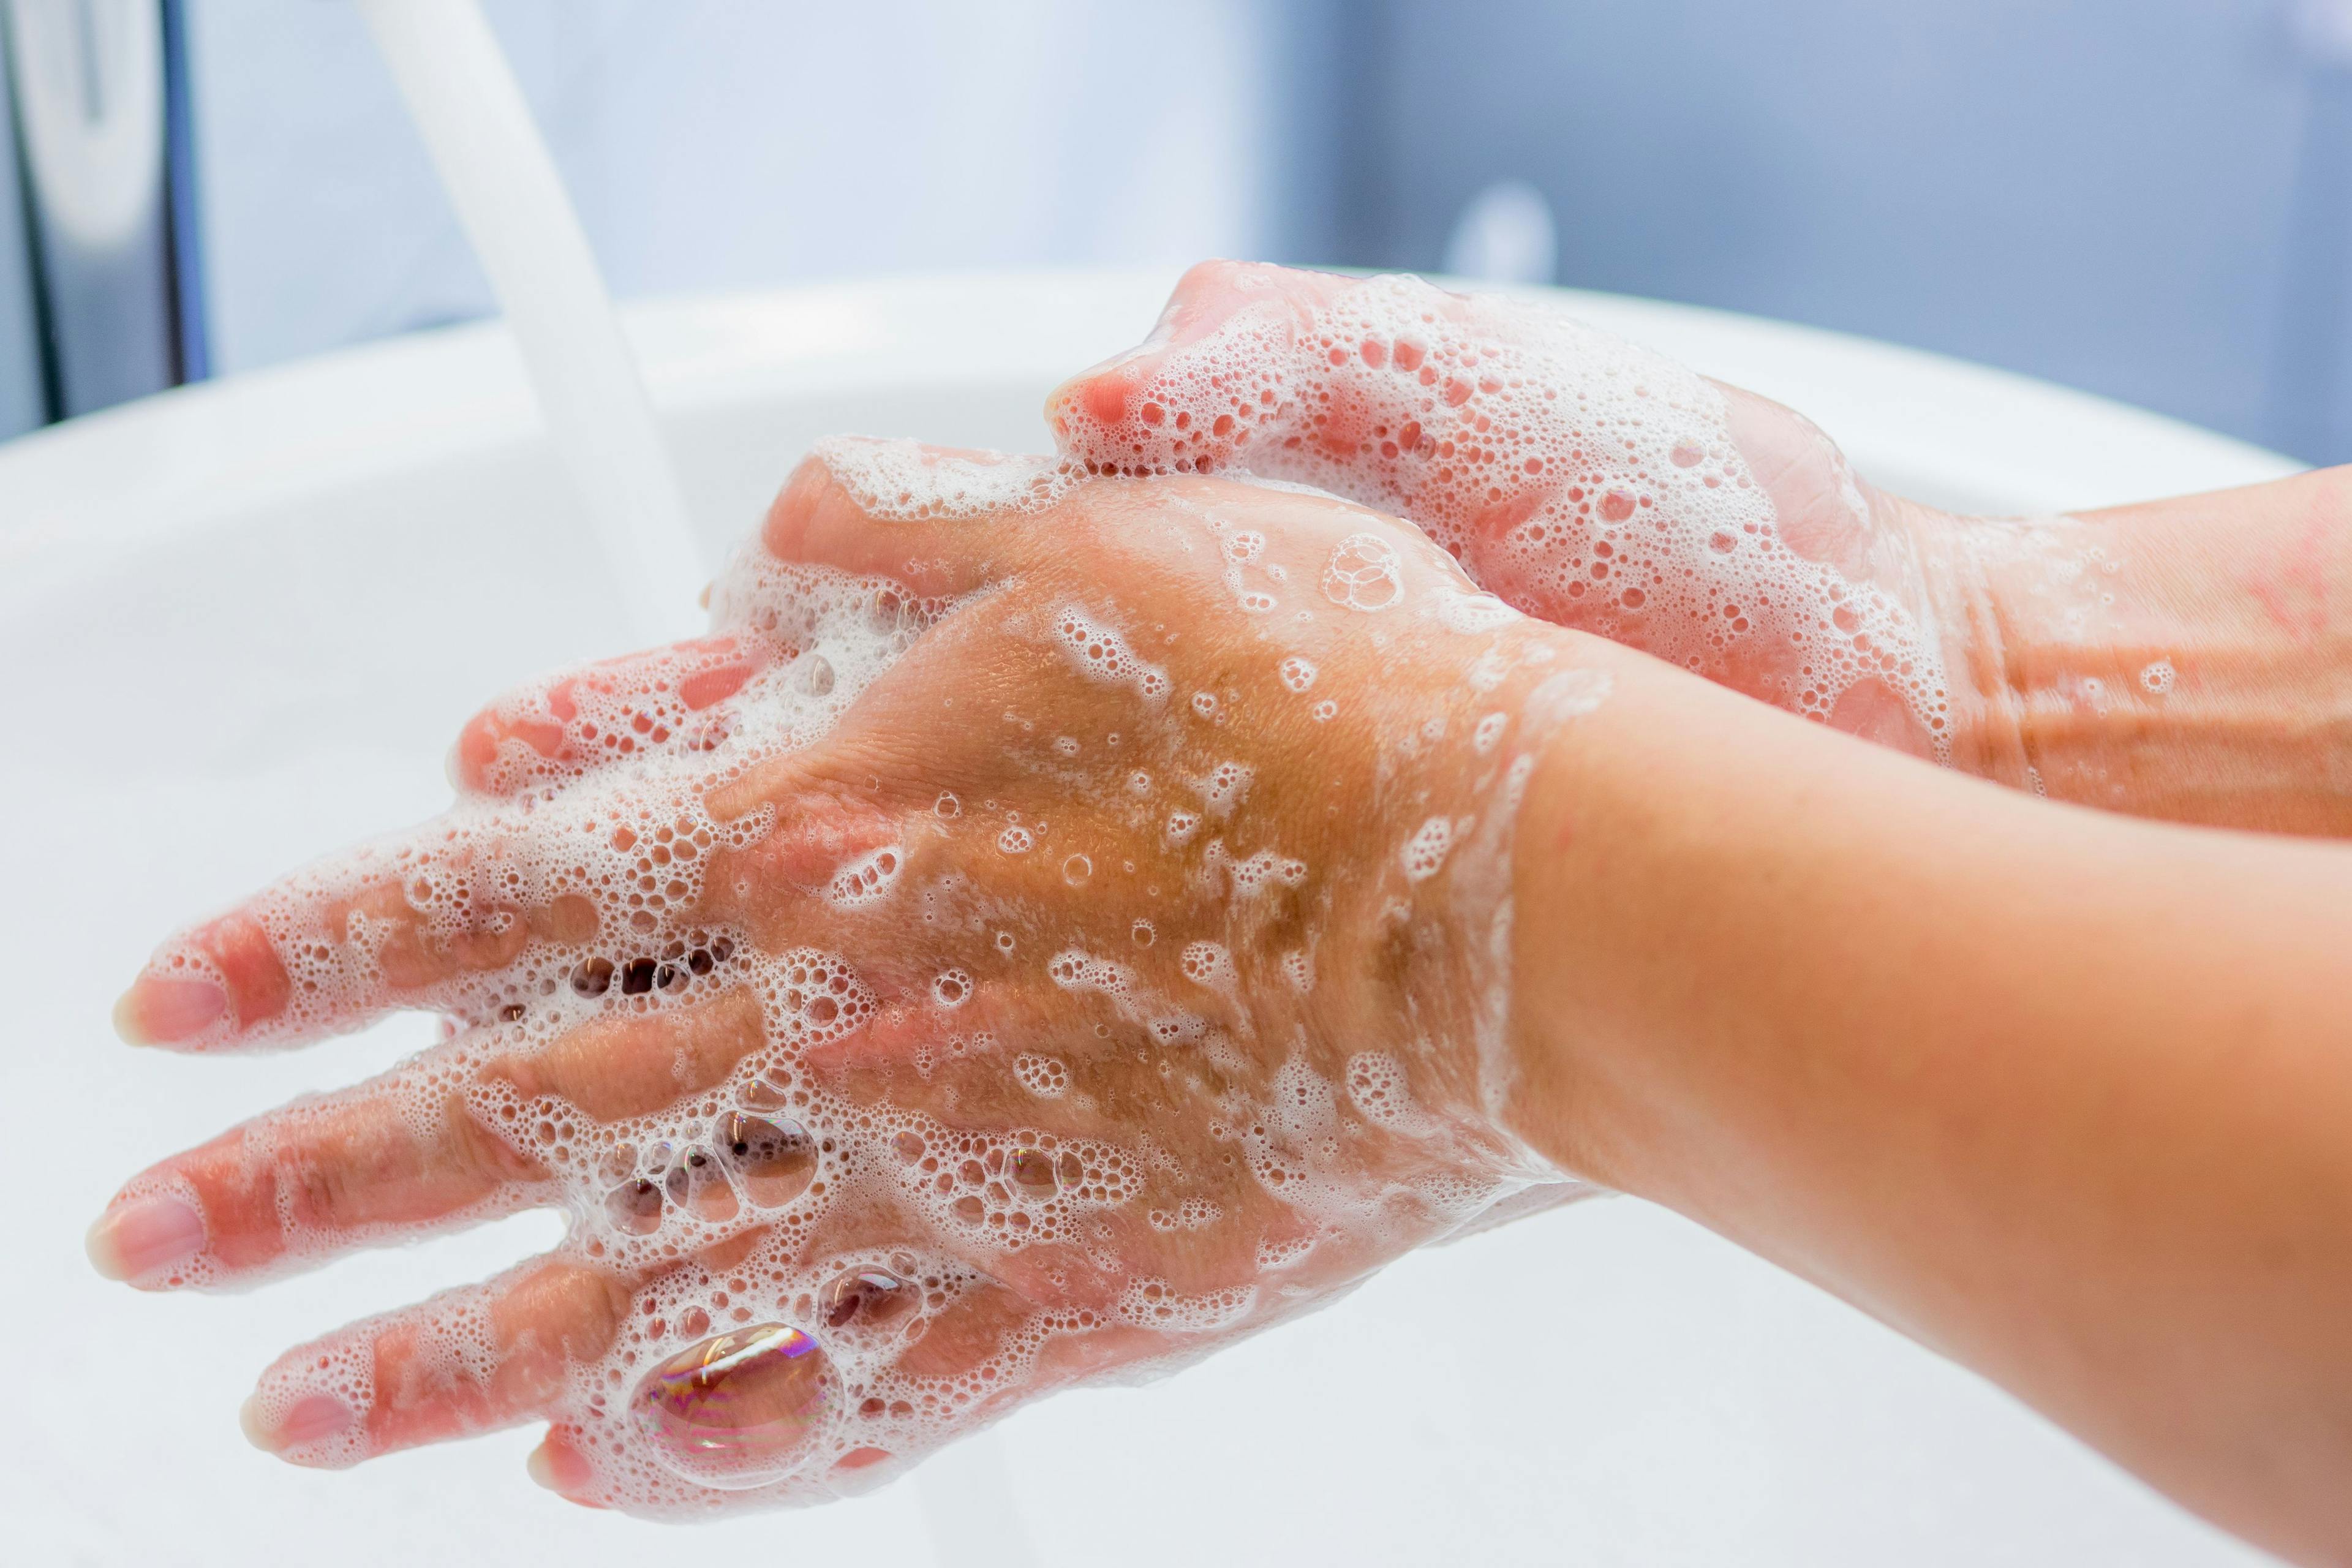 Study: Providers See the Light and Hand Hygiene Improves 